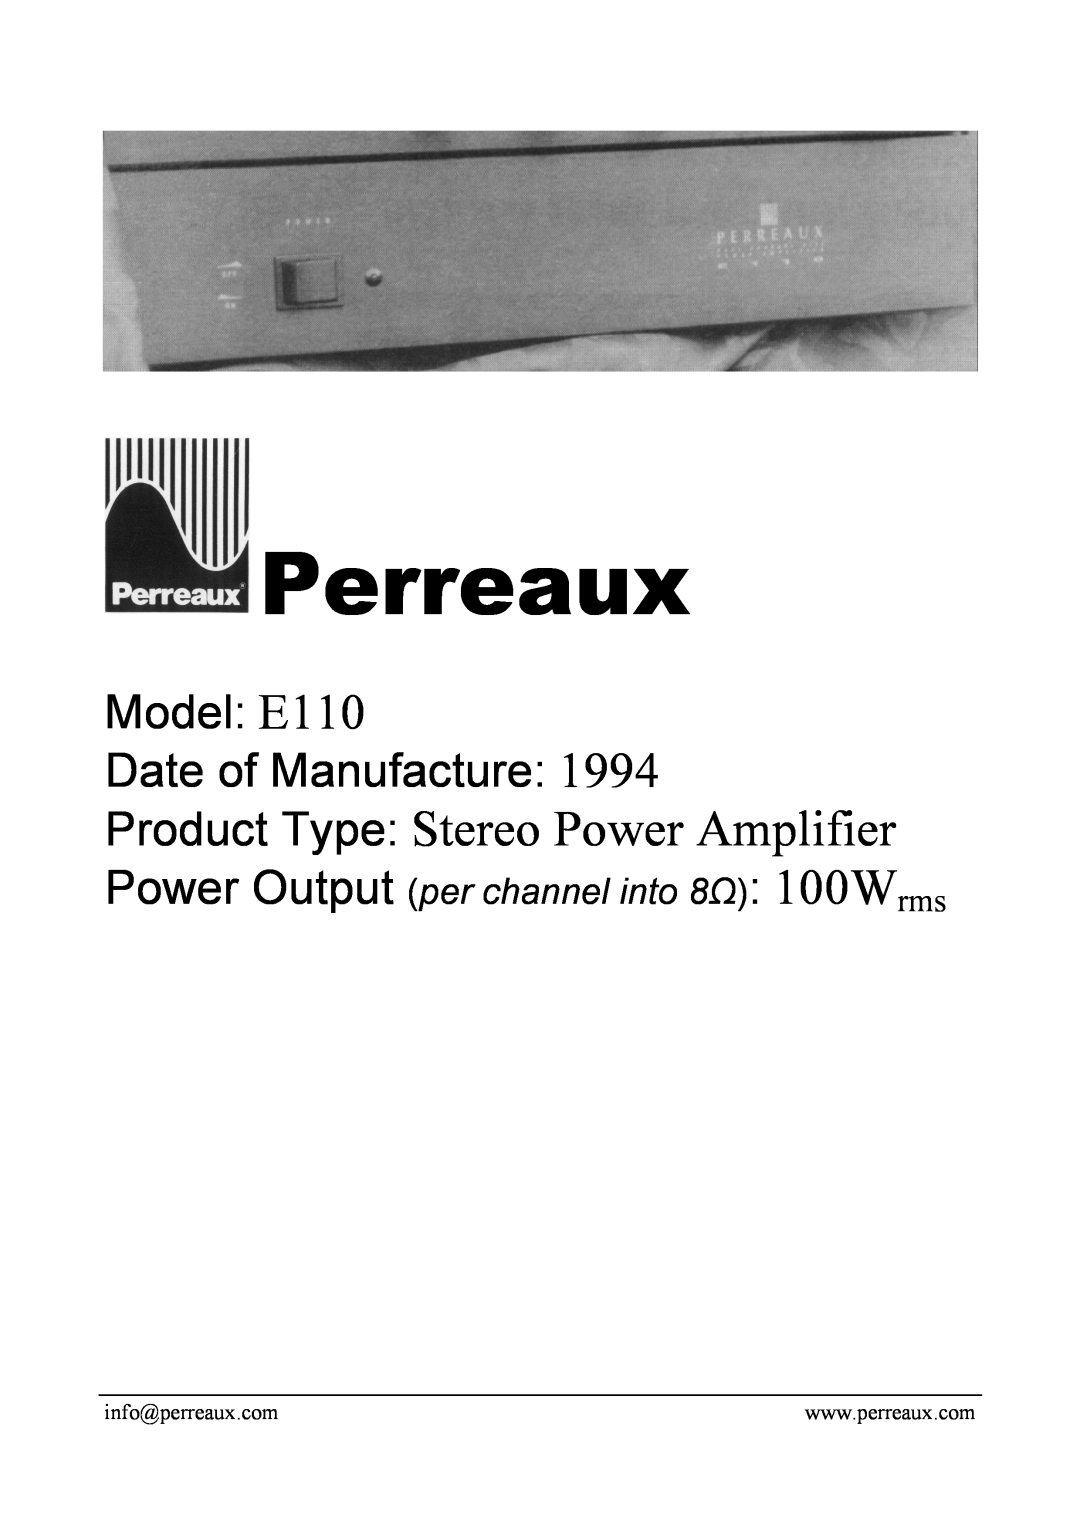 Perreaux manual Perreaux, Product Type Stereo Power Amplifier, Model E110 Date of Manufacture 